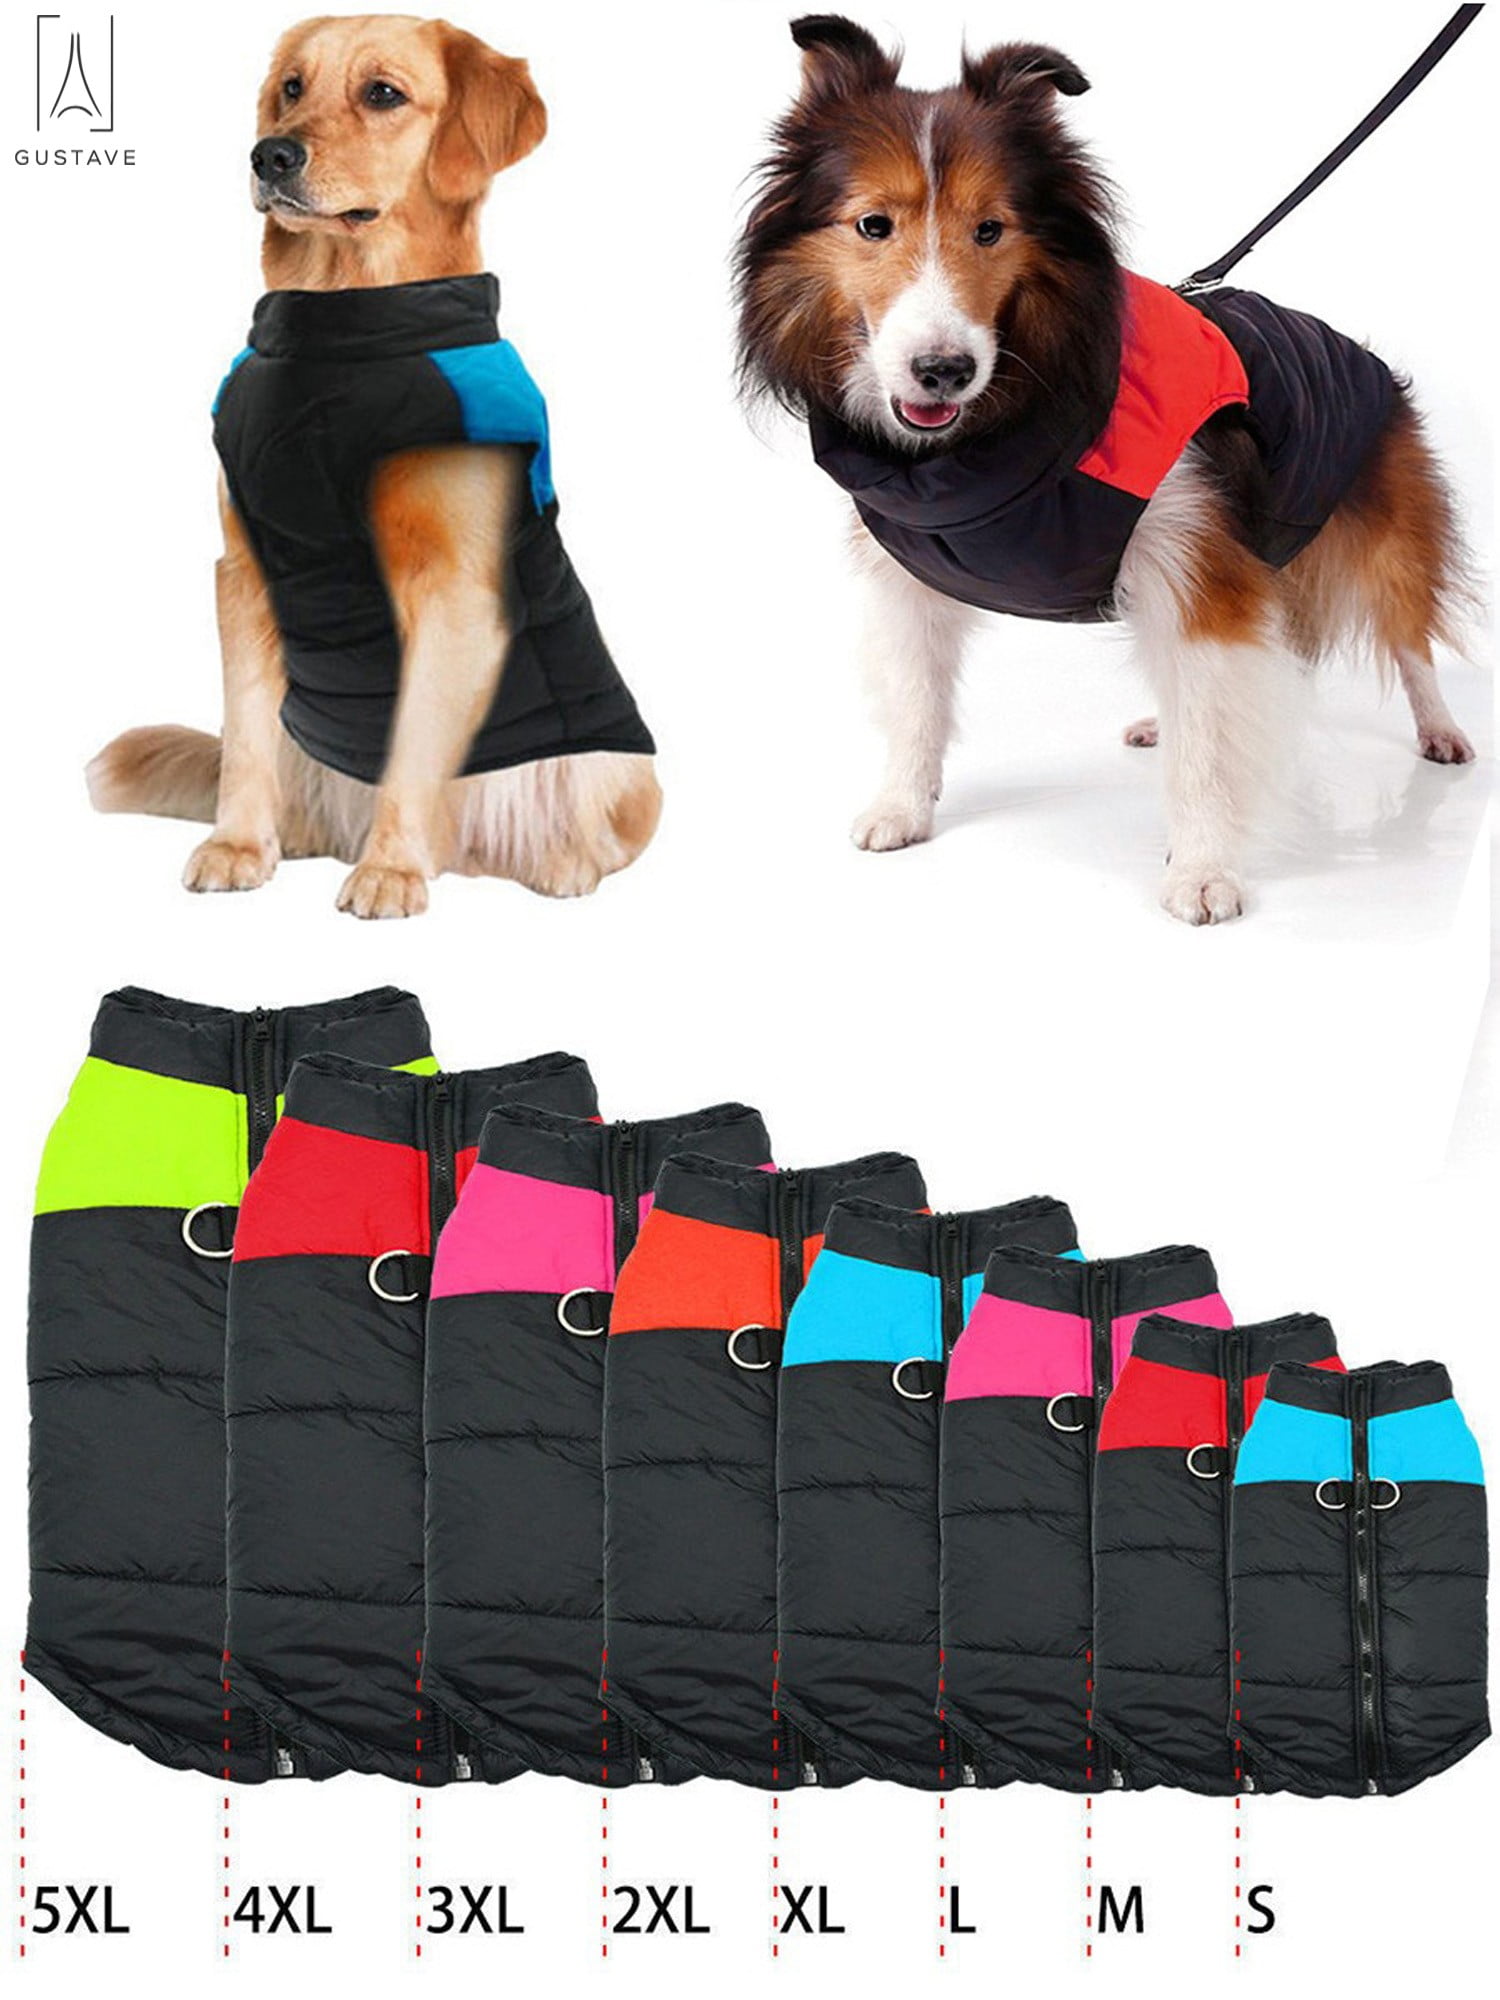 Shinmax Small Waterproof Dog Coat Jacket For Warmth Chest Protector Puffer Pet Dog Puppy Clothes Vest For Autumn Winter